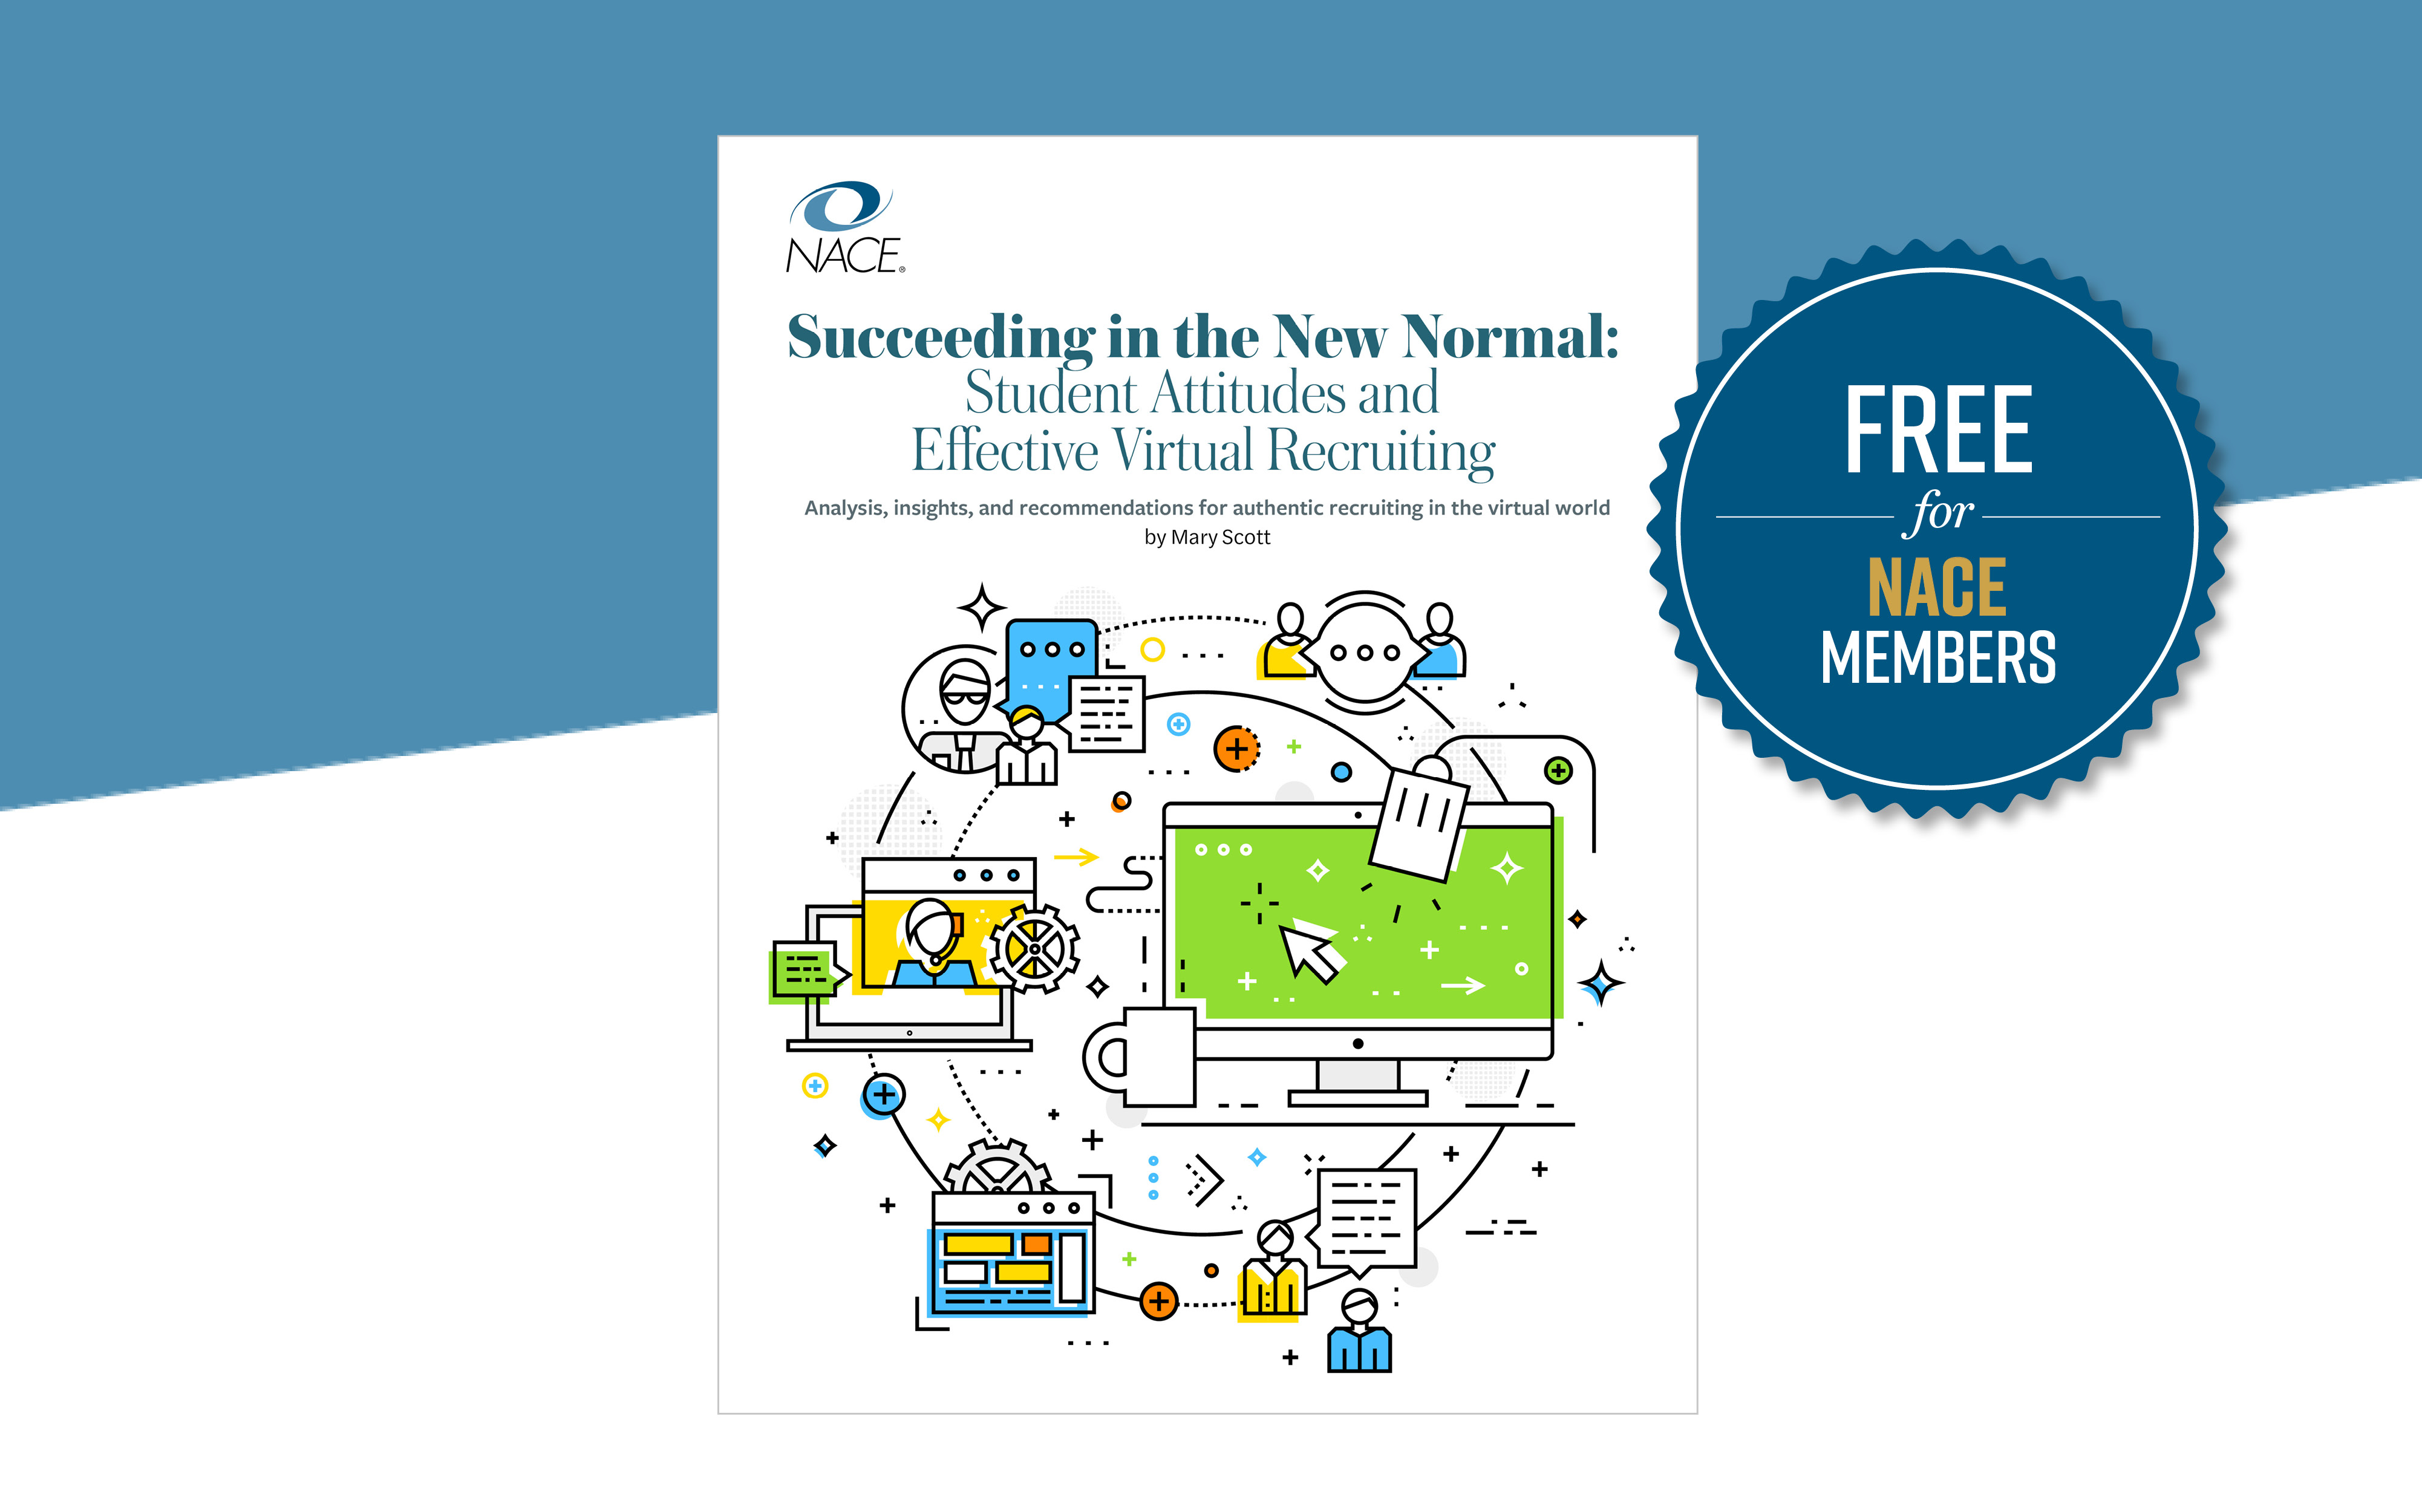 NACE’s Succeeding in the New Normal: Student Attitudes and Effective Virtual Recruiting by Mary Scott